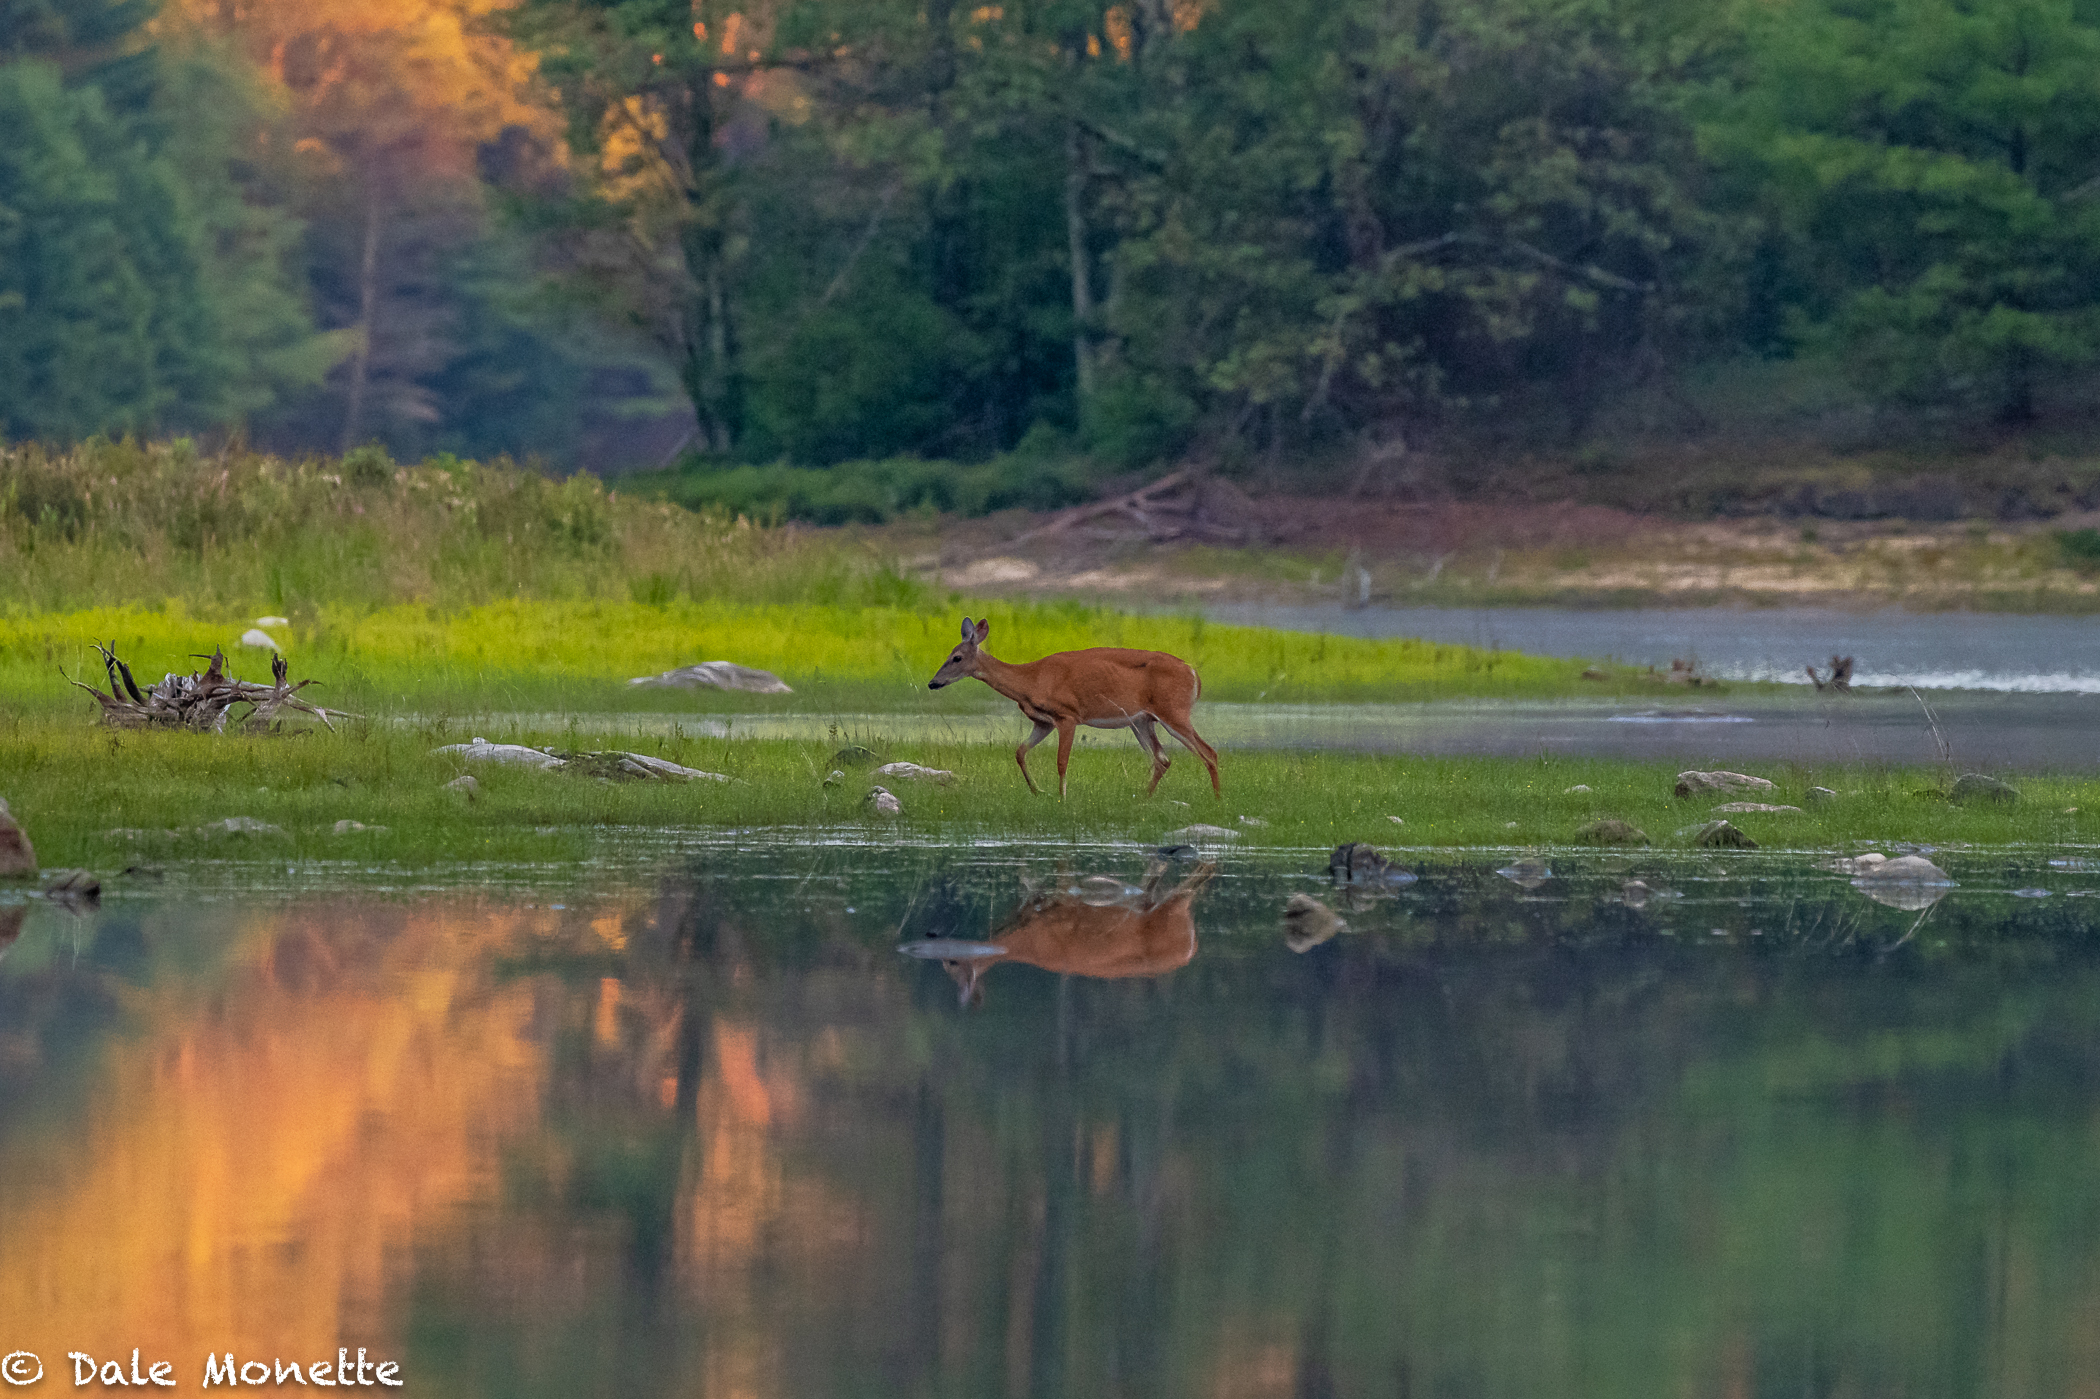   All was quiet and watching this white-tailed doe amble the shoreline.......... 20 seconds of sun through the cloud opening.... "click"......... never see this again in my lifetime.....  